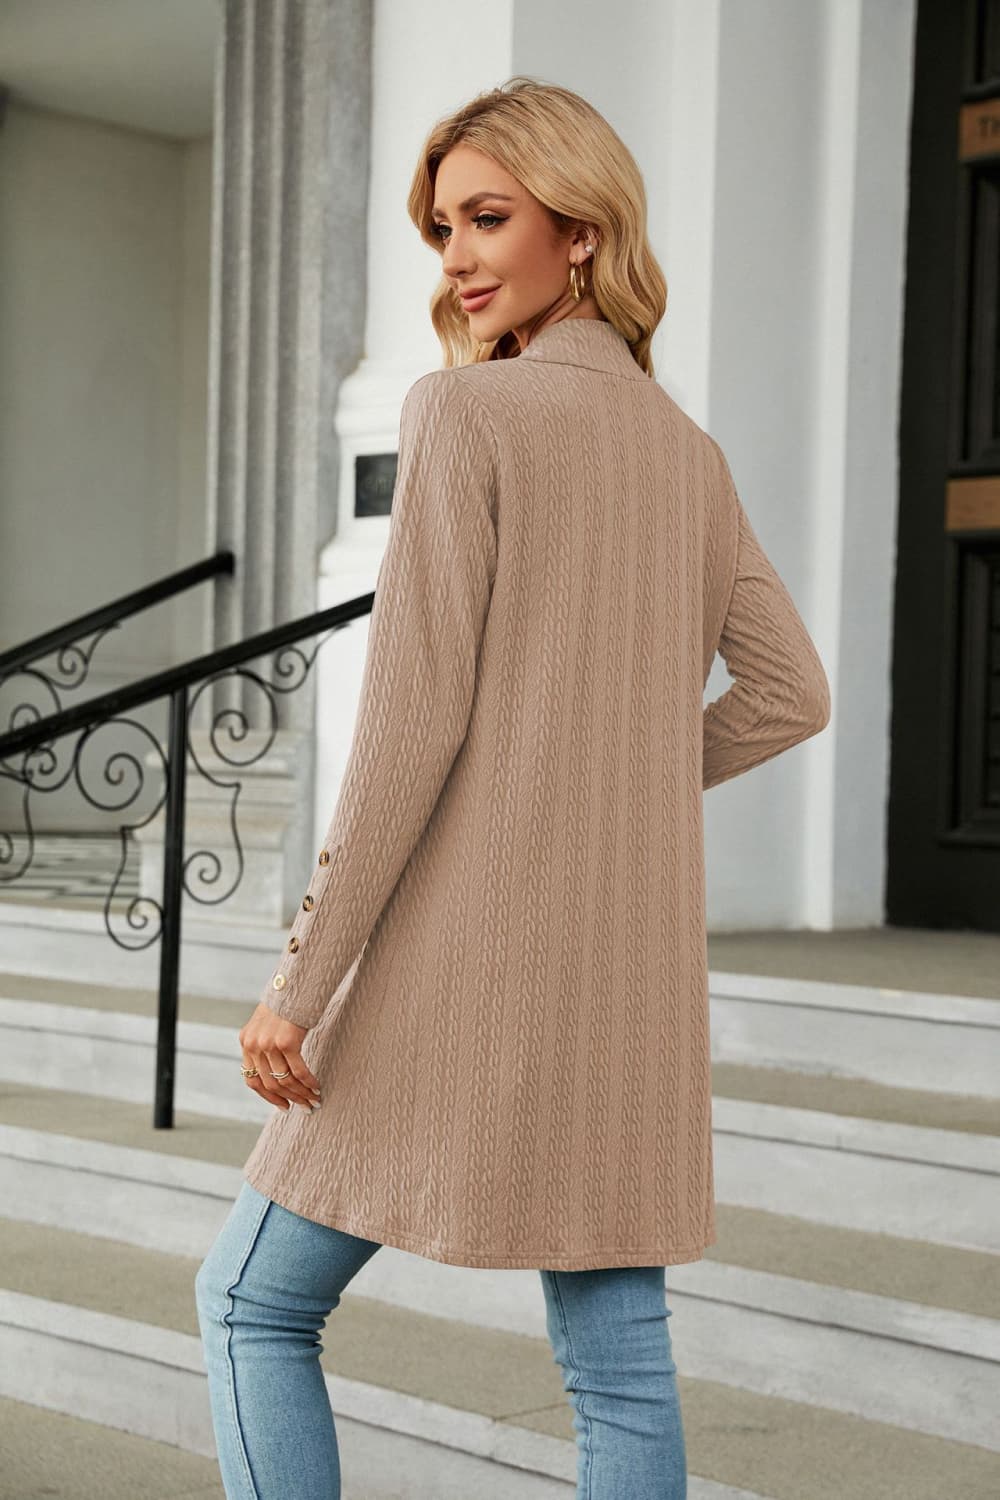 Long Sleeve Open Front Cardigan - Women’s Clothing & Accessories - Shirts & Tops - 15 - 2024